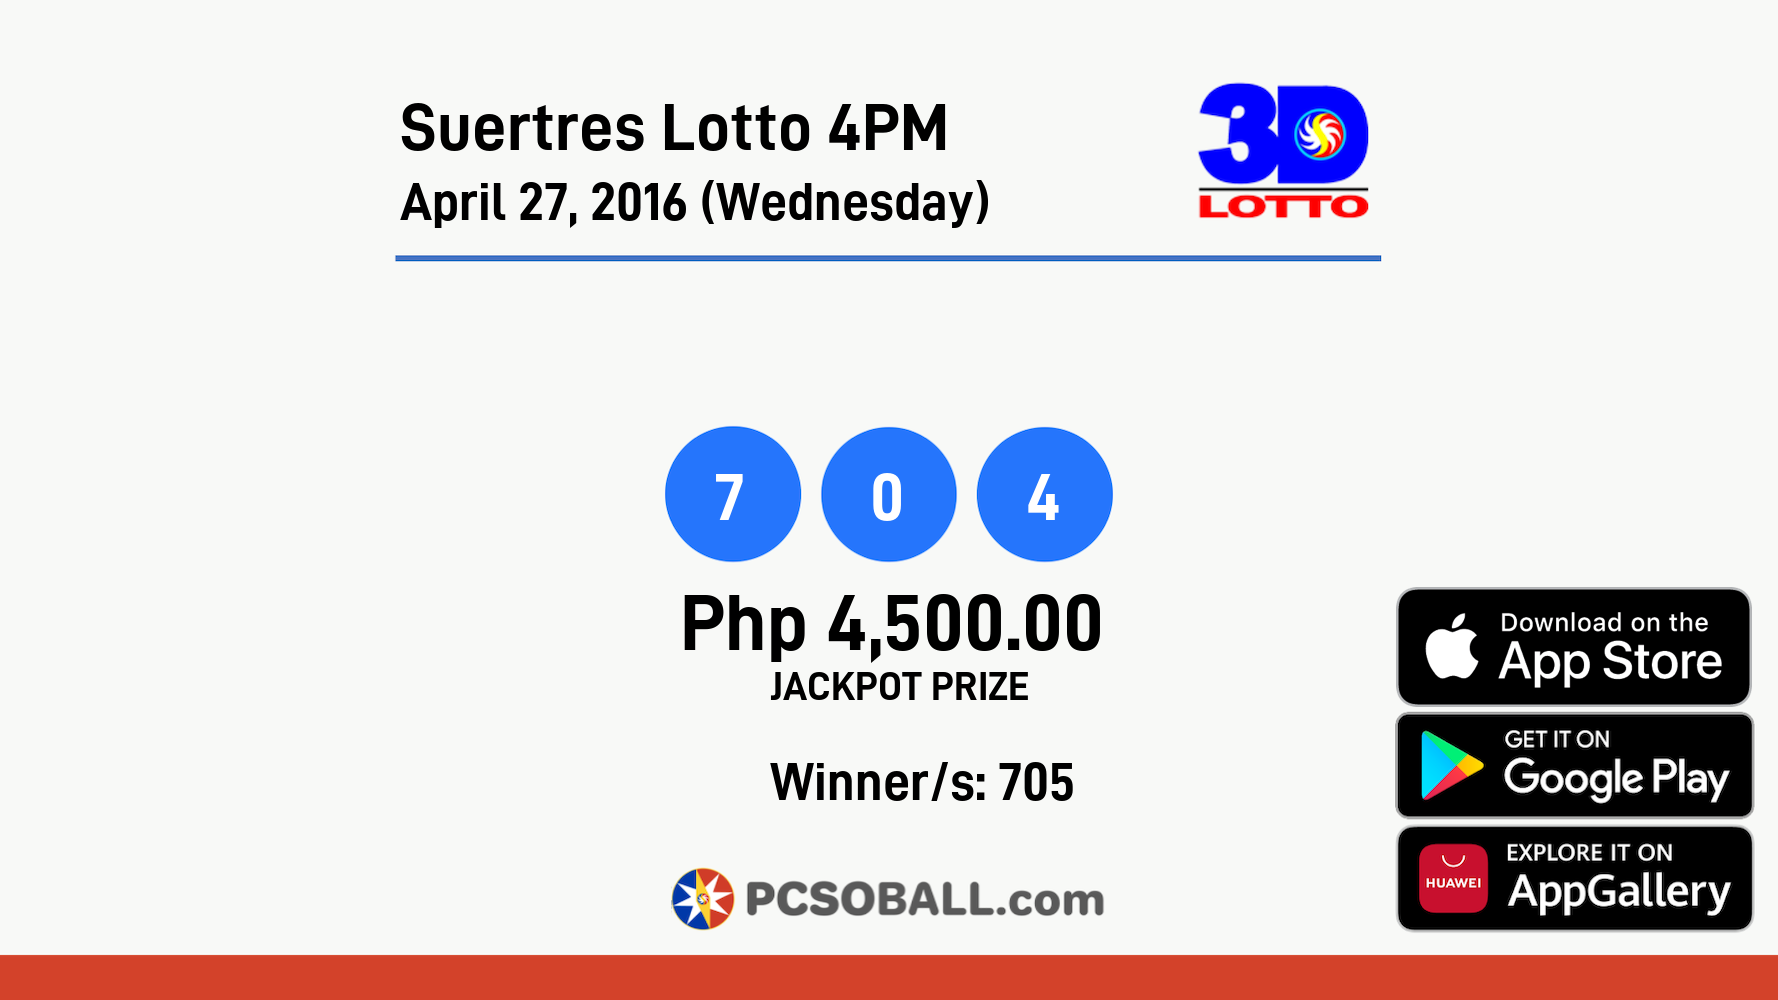 Suertres Lotto 4PM April 27, 2016 (Wednesday) Result